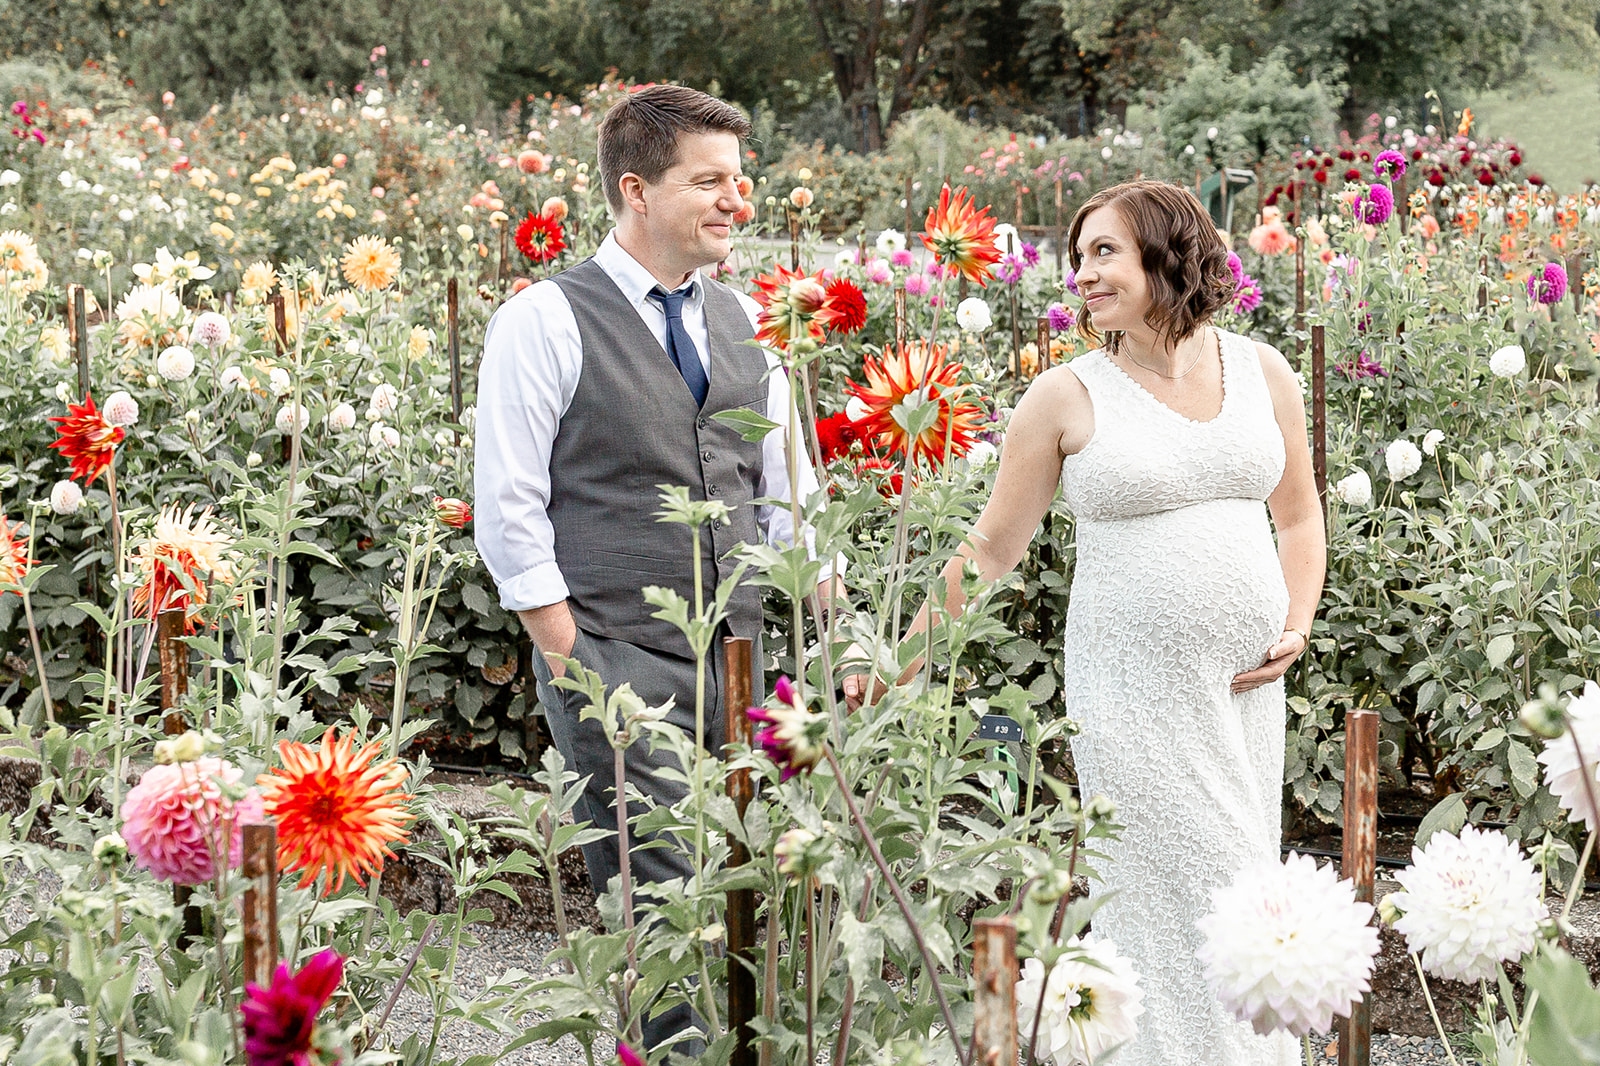 A mother to be leads her husband by the hand through a large flower garden Portland Date Night Ideas